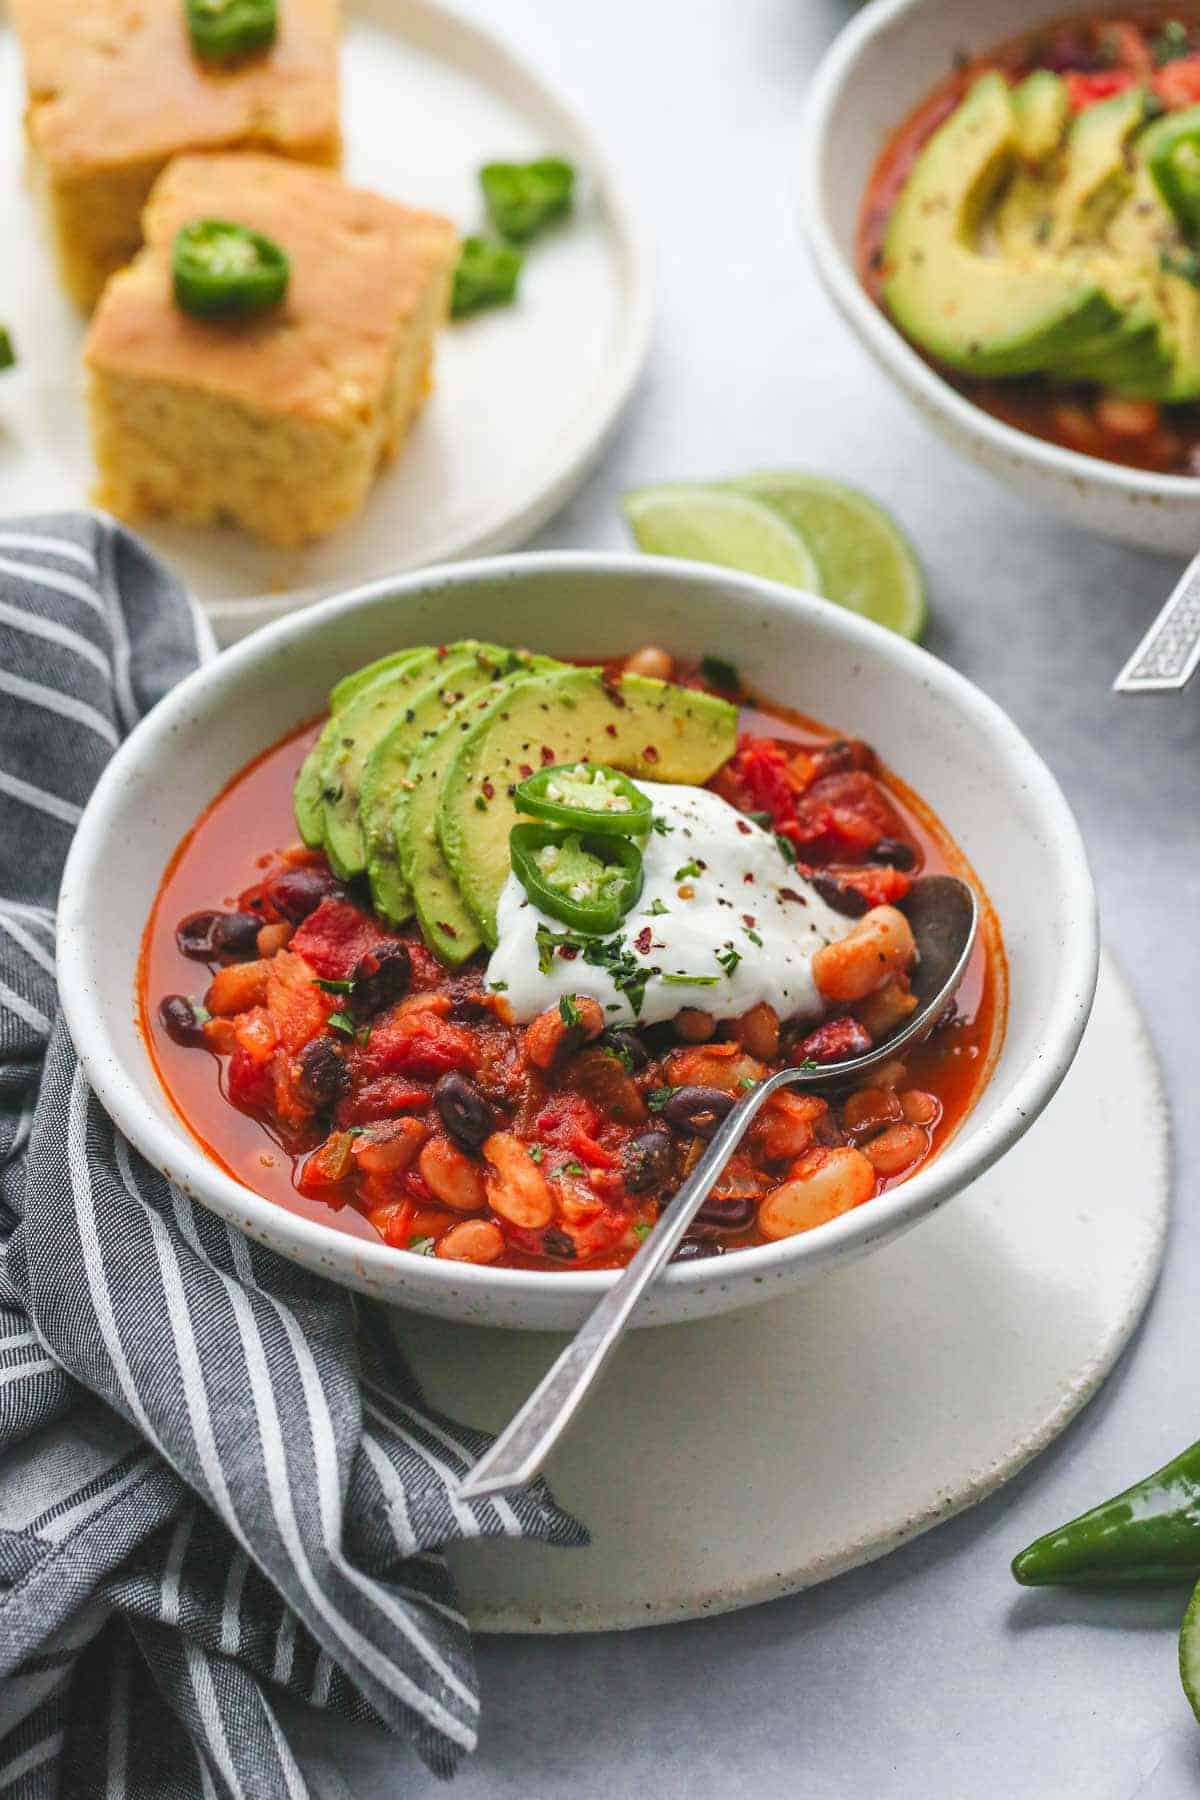 Vegan chili in a white bowl, topped with avocado, vegan sour cream, and jalapeño slices.